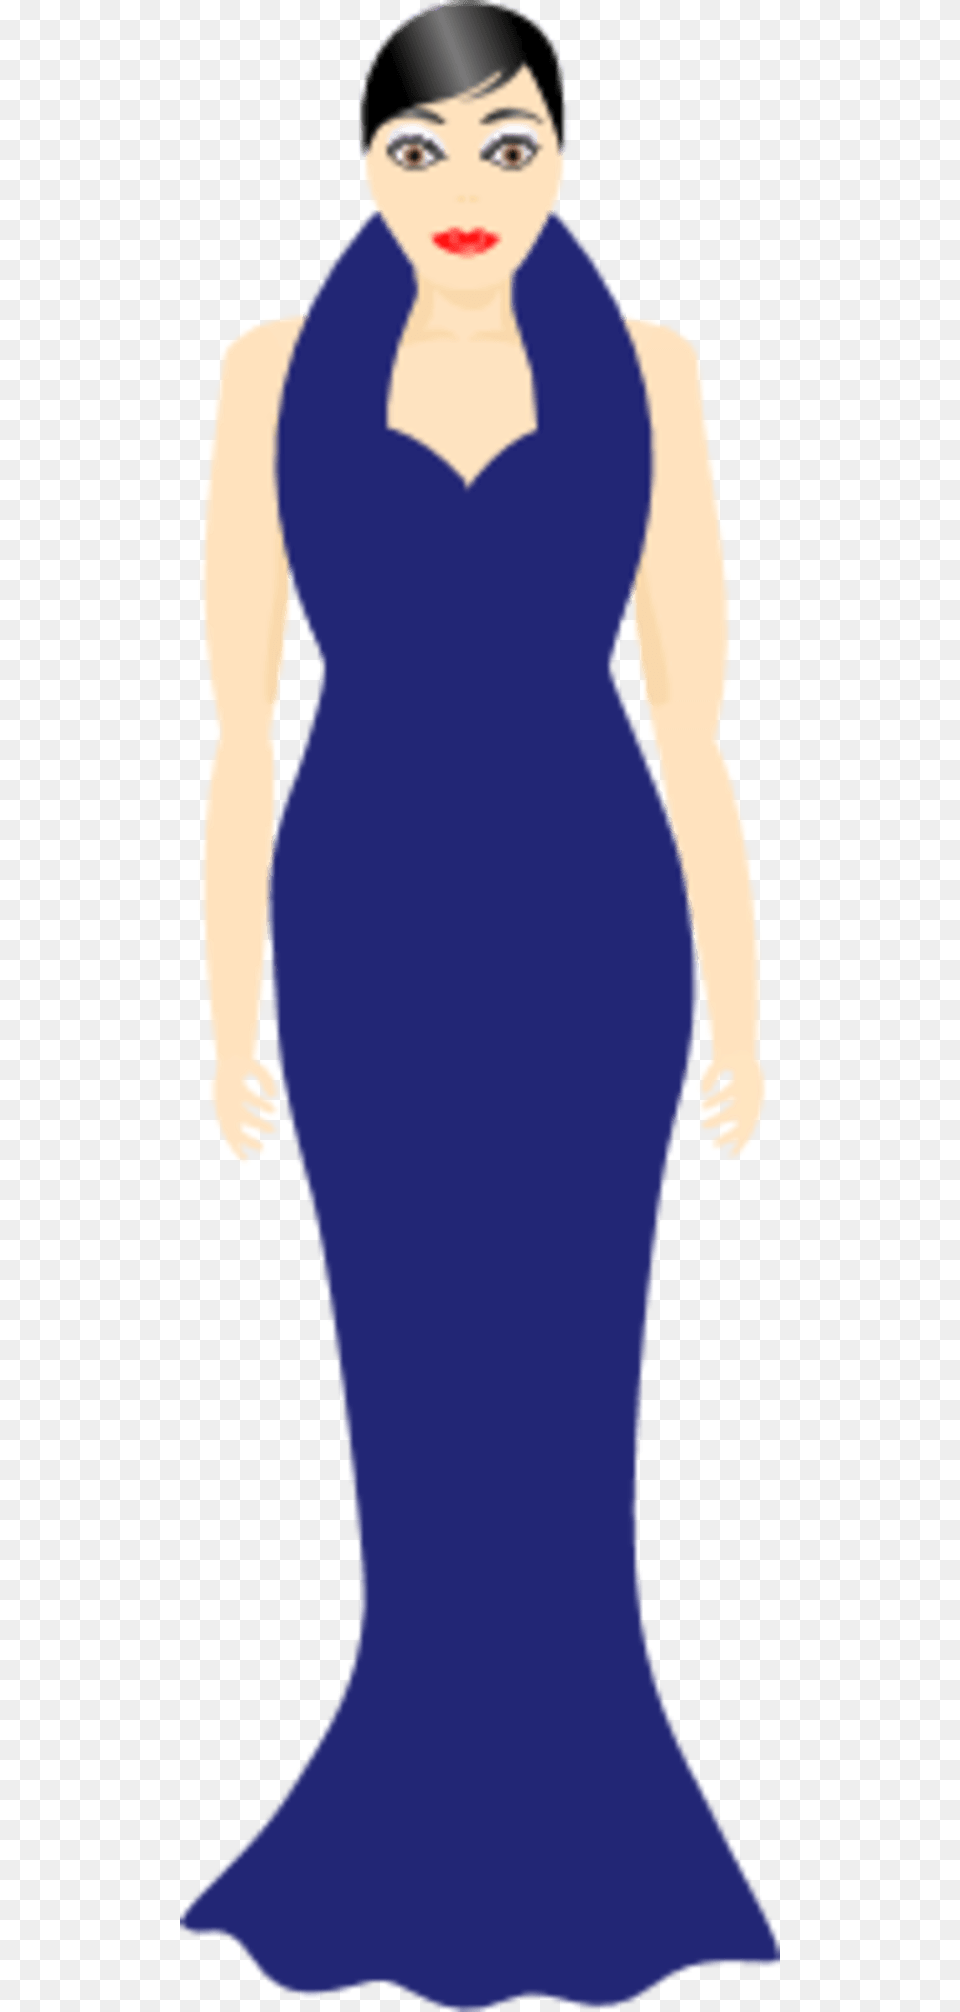 Woman In Blue Dress Clipart Cocktail Dress, Adult, Person, Gown, Formal Wear Png